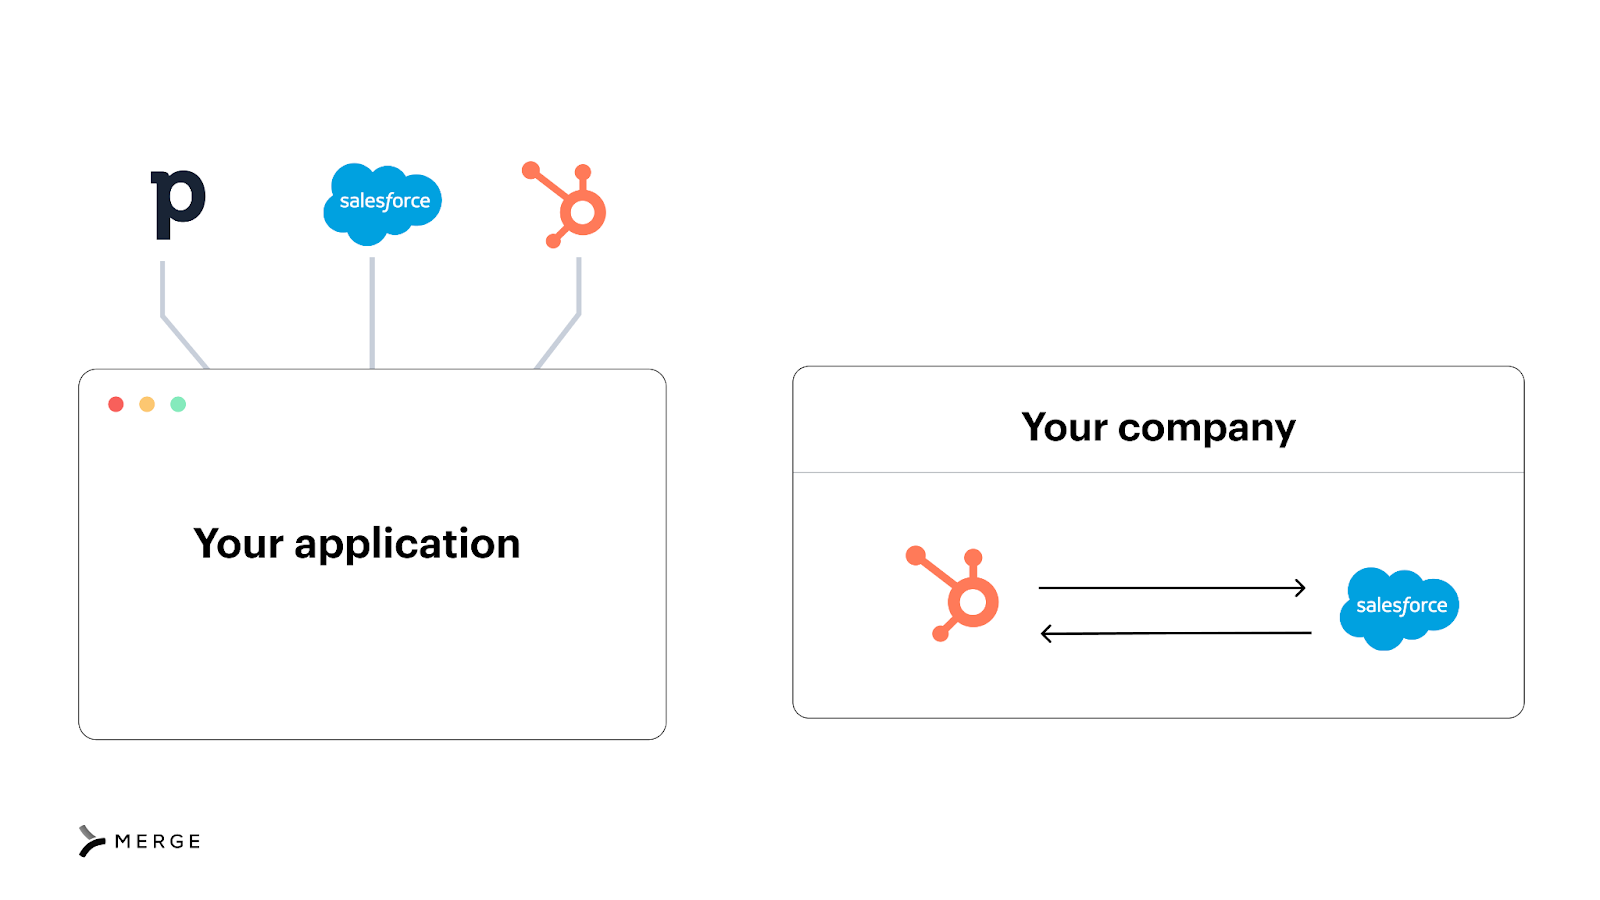 The two types of application itnegration